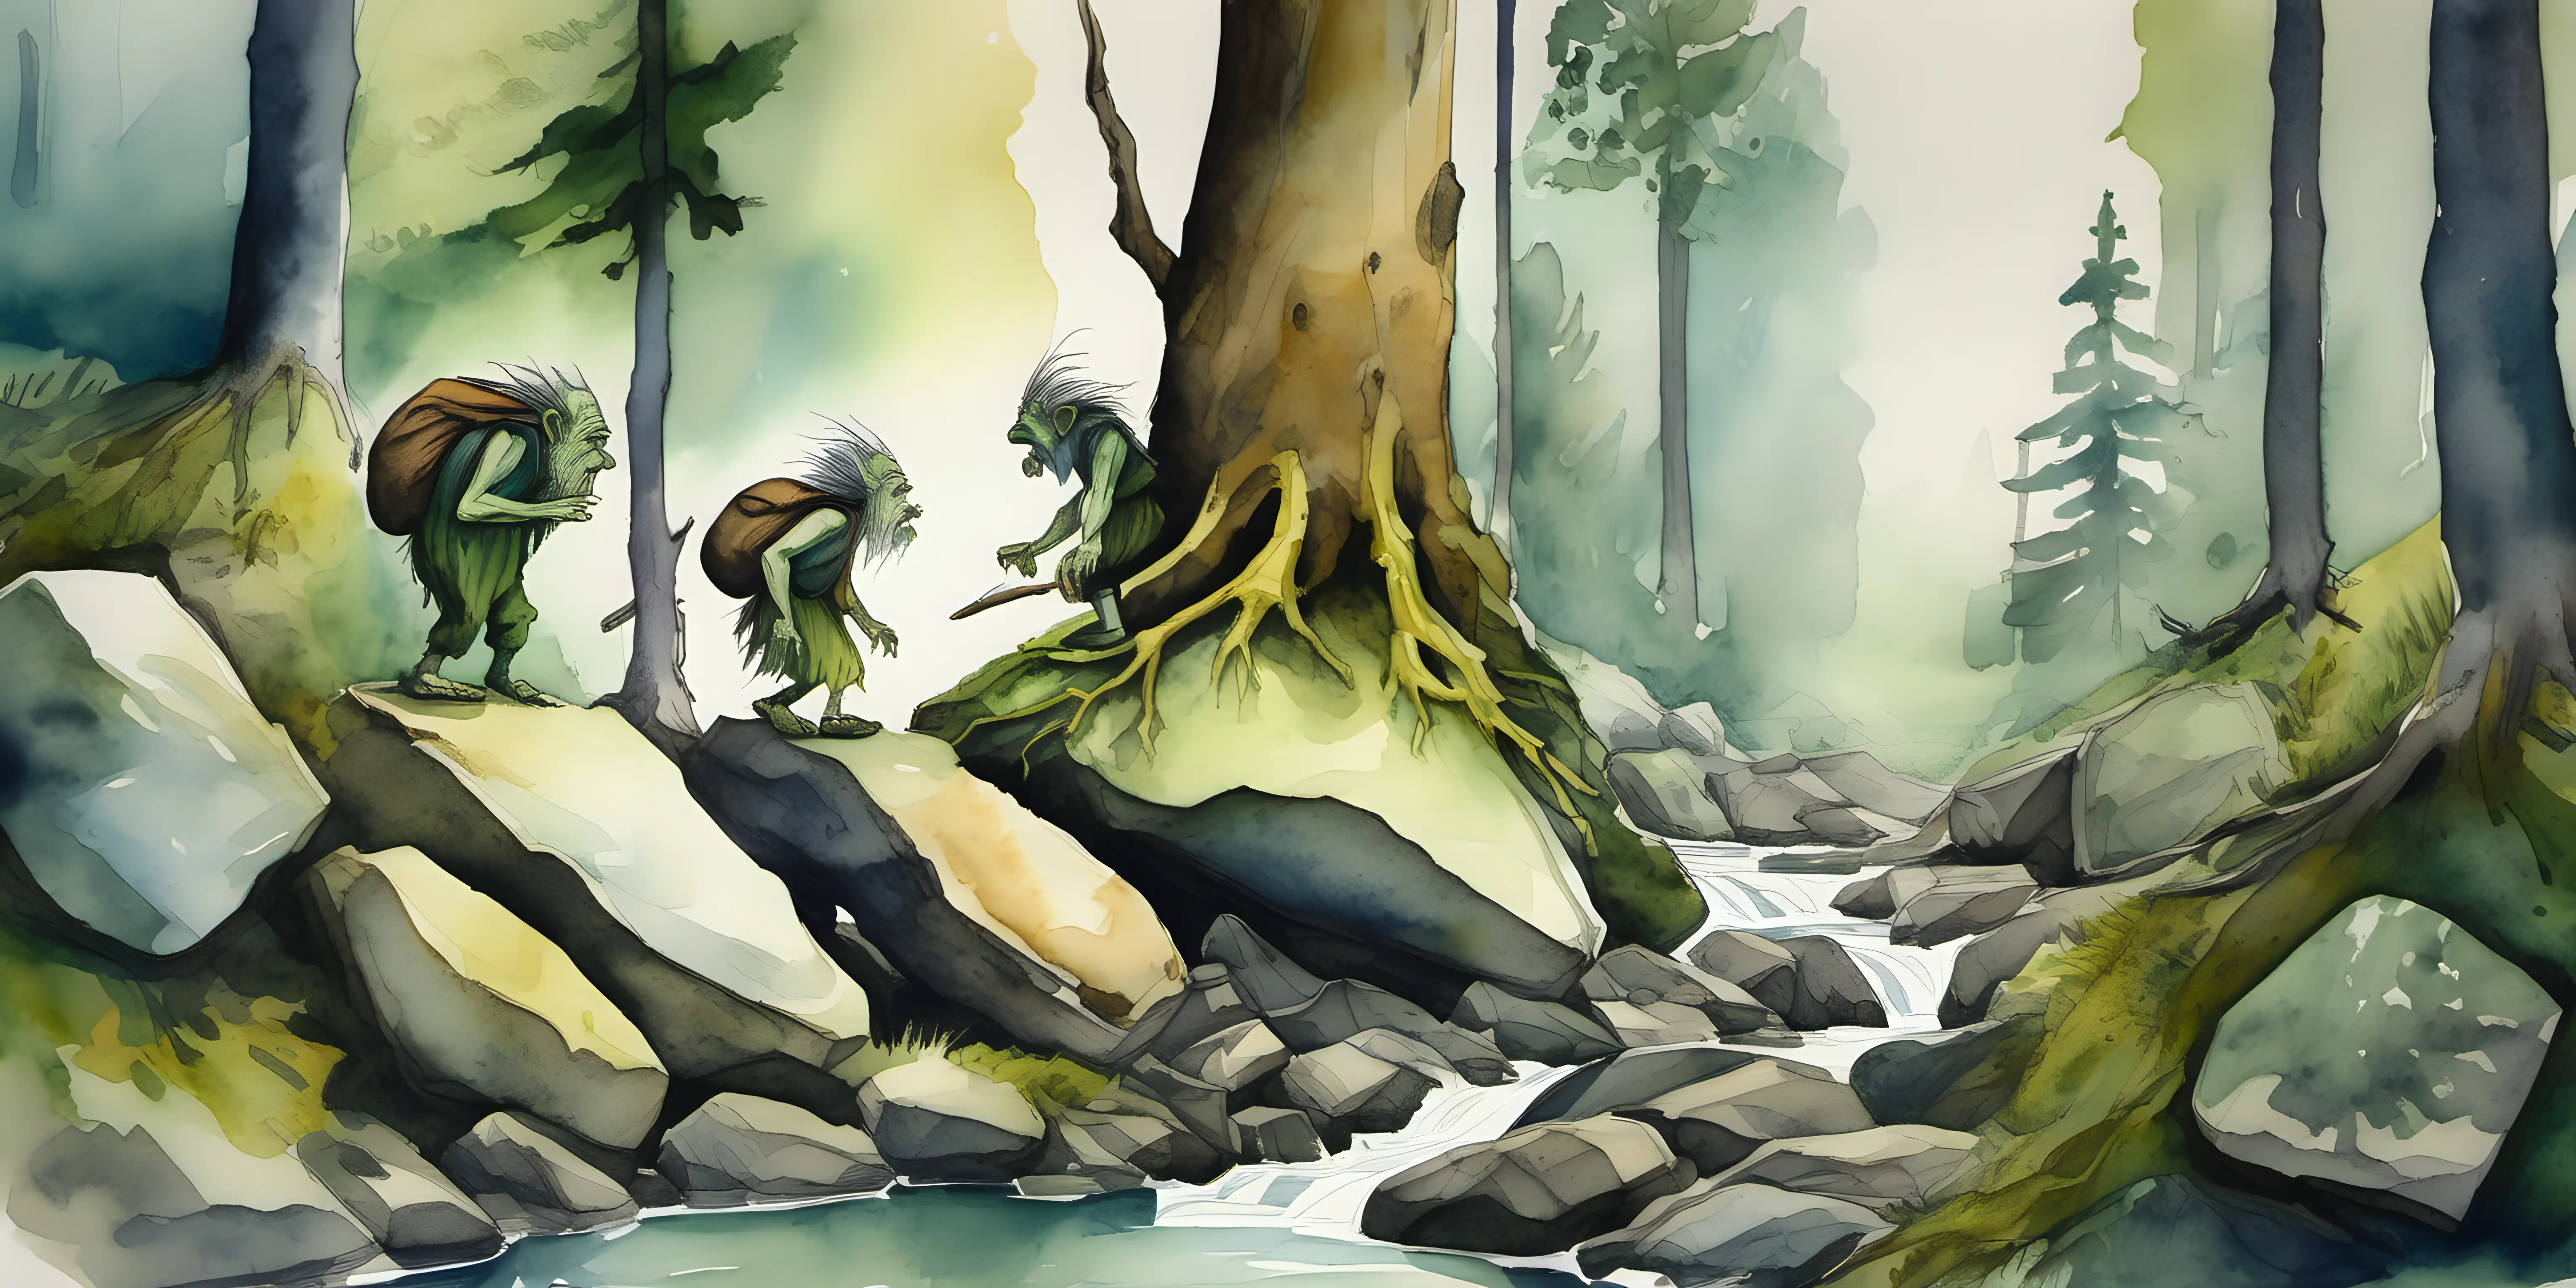 watercolour painting of  two folklore trolls in Norway  in ancient green pine tree forest with huge boulders & a stream